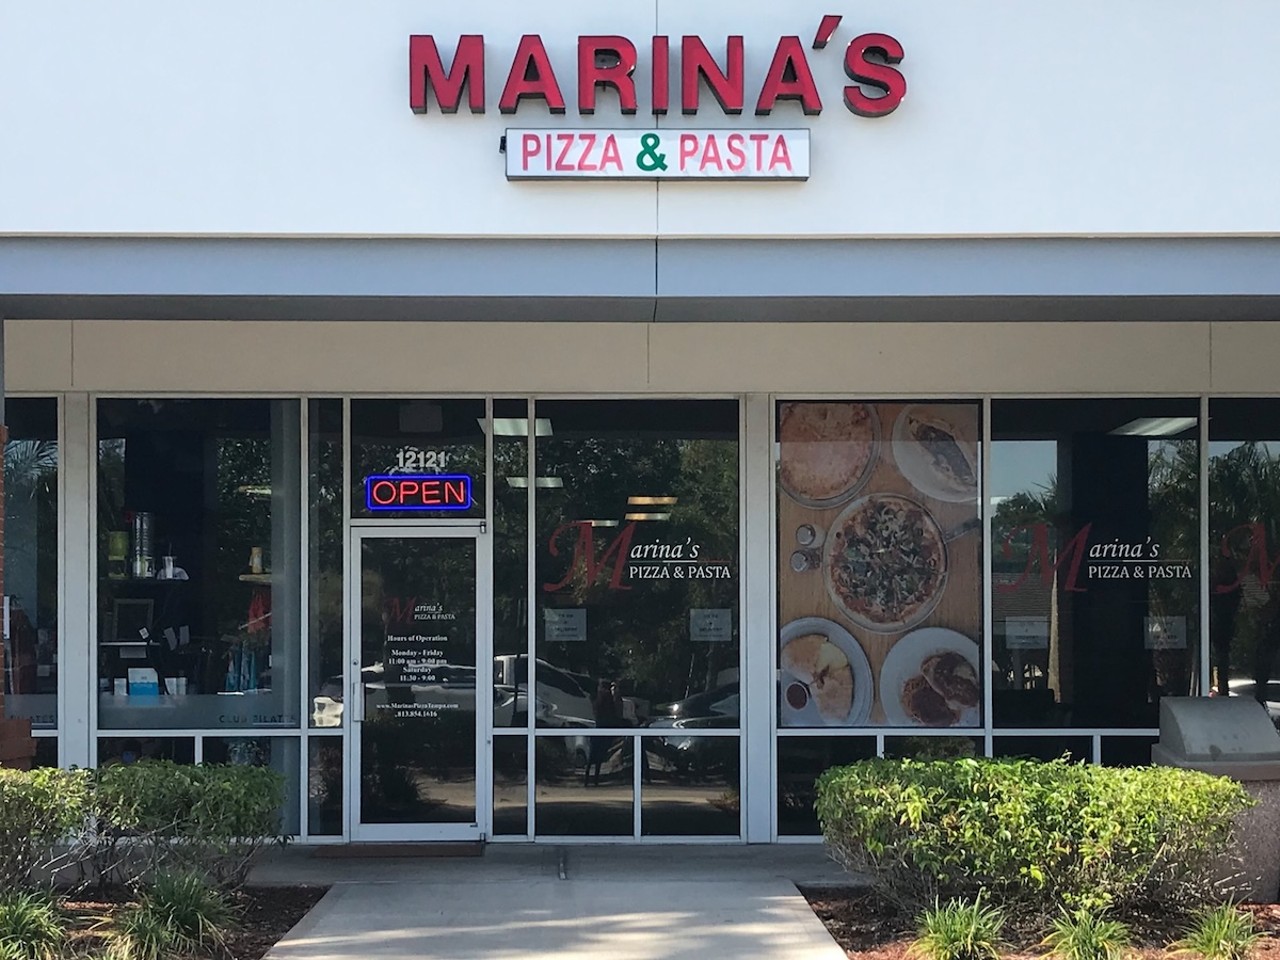 Marina’s Pizza and Pasta (7.5)12121 W Linebaugh Ave., TampaThe suburbs got some love, with Portnoy and Barstool superfan Danny Boy Cane trying a taste of this Westchase staple.Photo via marinaspizzatampa/Facebook